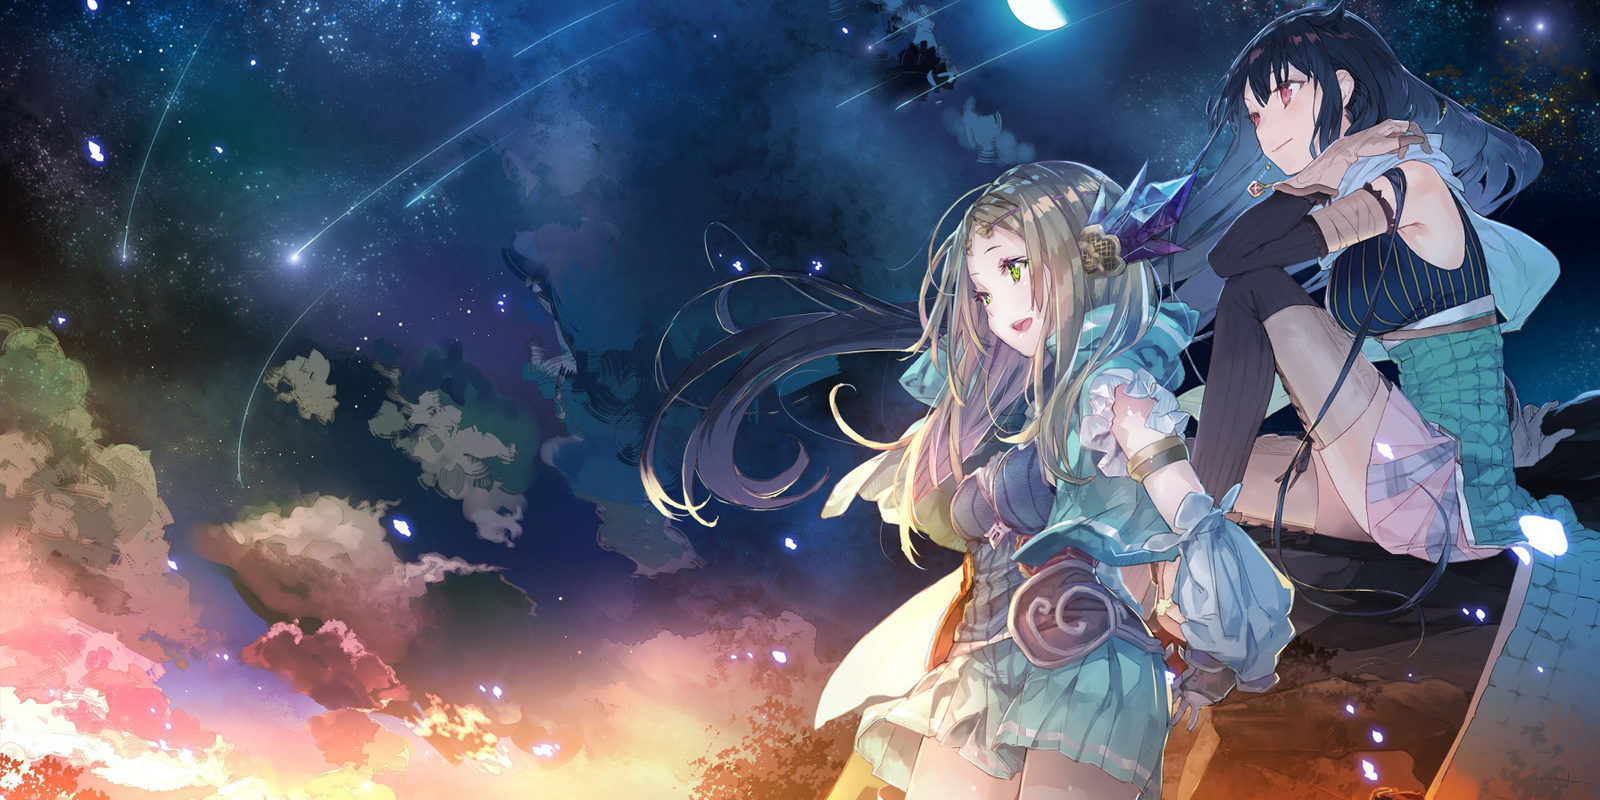 Análisis 'Atelier Firis: The Alchemist and the Mysterious Journey' para PS4